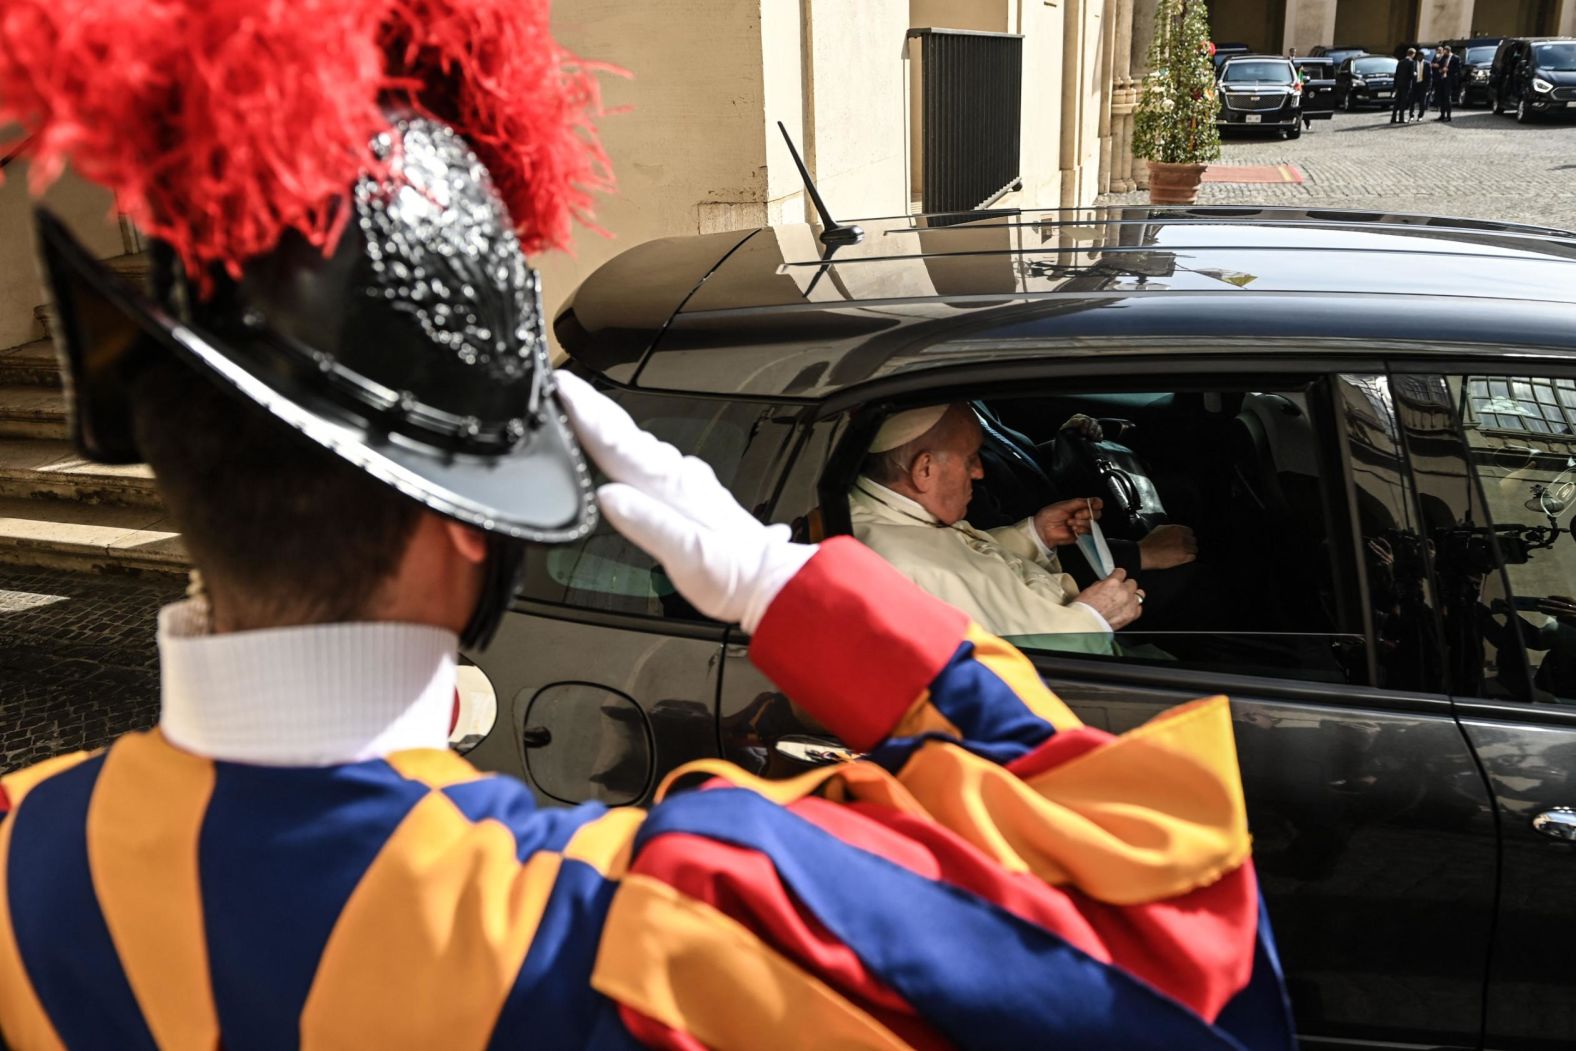 Pope Francis leaves in a car following his private audience with Biden.